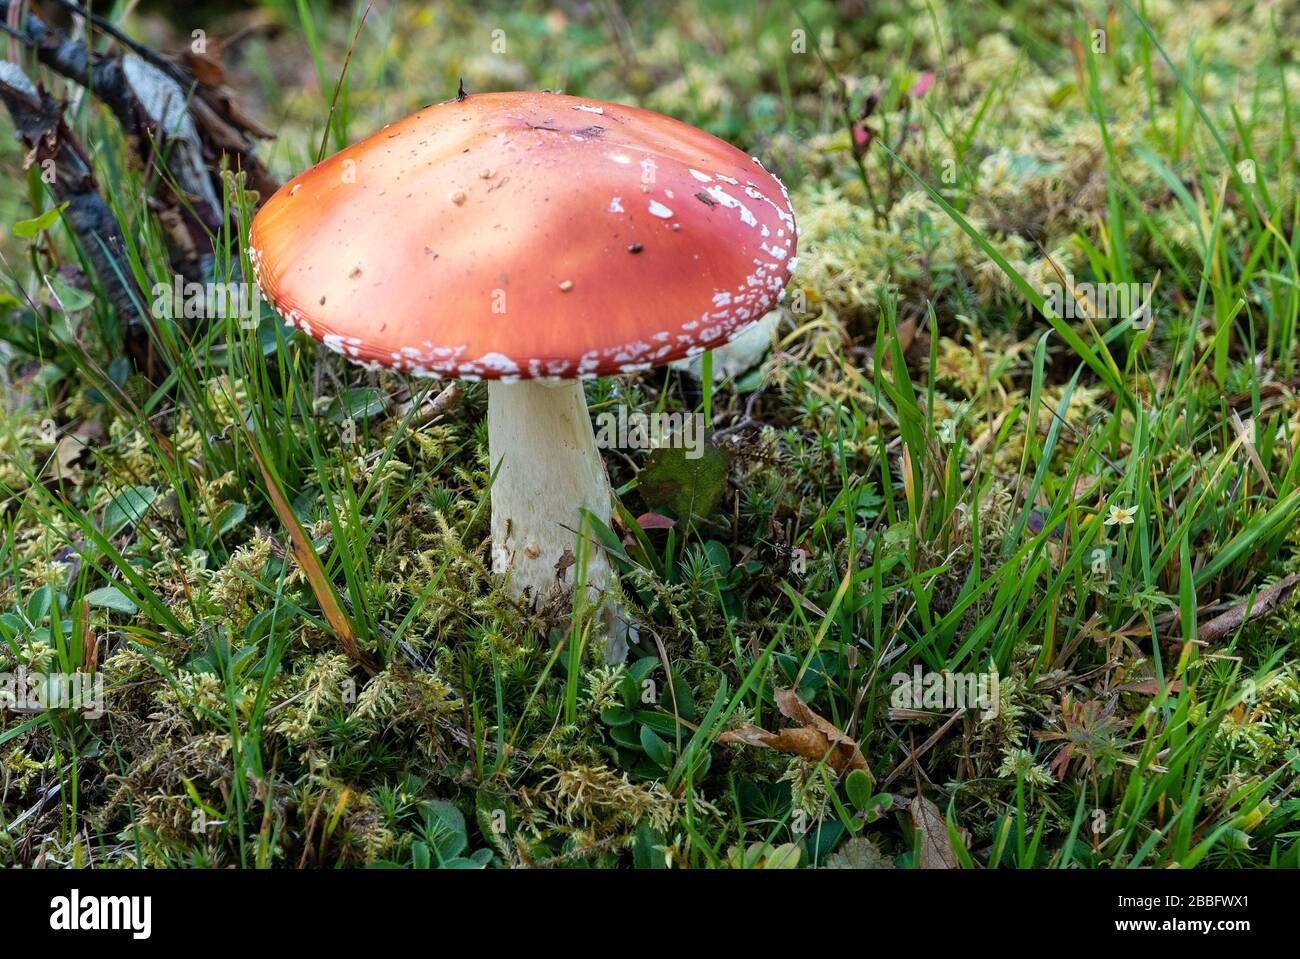 Amanita muscaria a poisonous mushroom in plenty in the Northern Hemisphere said to be consumed by the Viking Berserker to achieve battle rage. Stock Photo